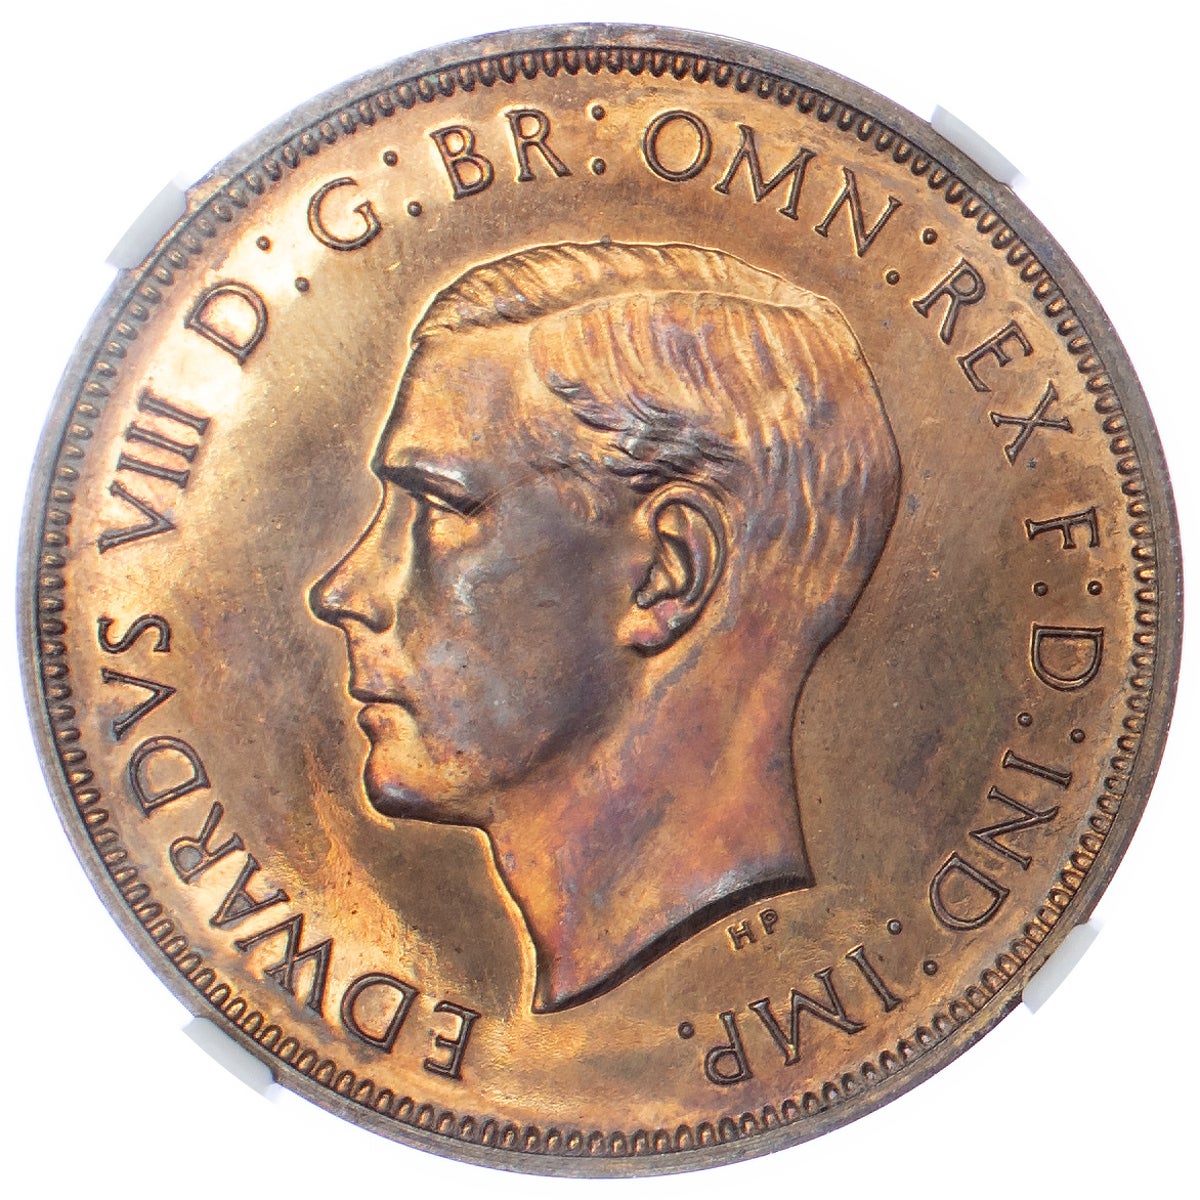 Stakes in rare King Edward VIII penny snapped up